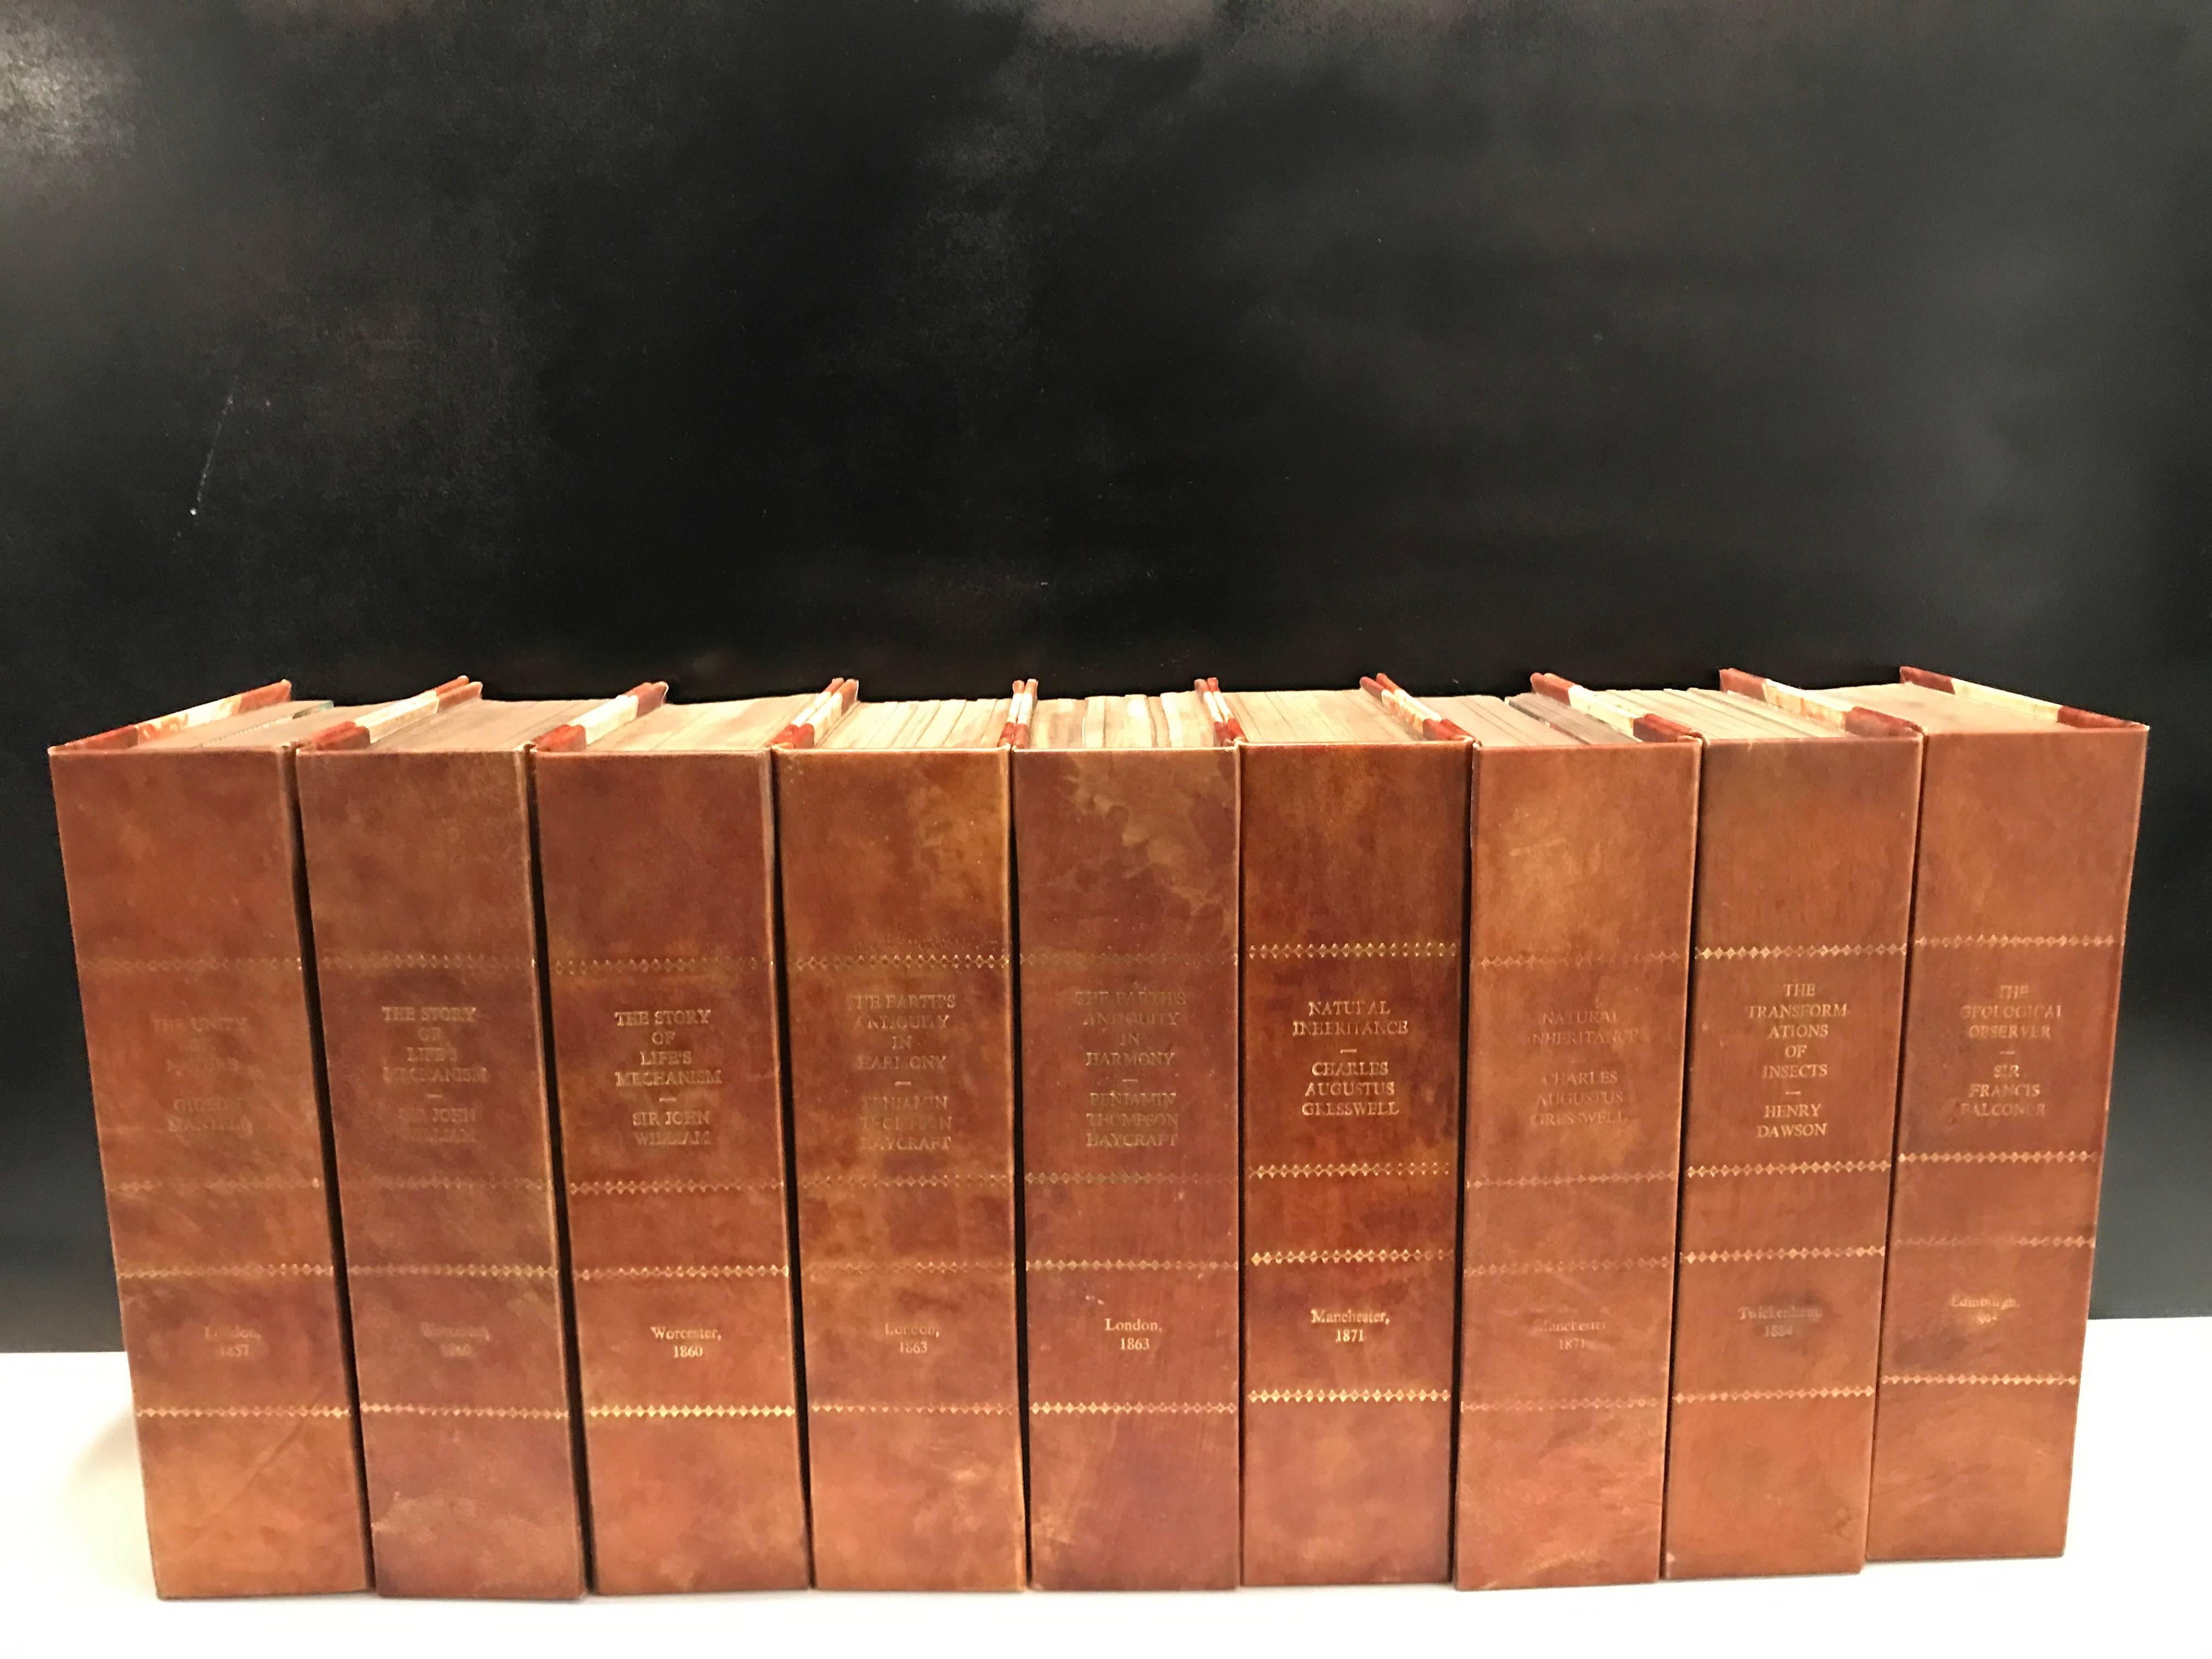 Nine large leather bound decorator faux books or tomes, each one with gilt lettering of titles, authors and year, with marbleized covers and simulated gilt pages, the books do not open. Each book measures 3 inches thick, 7.5